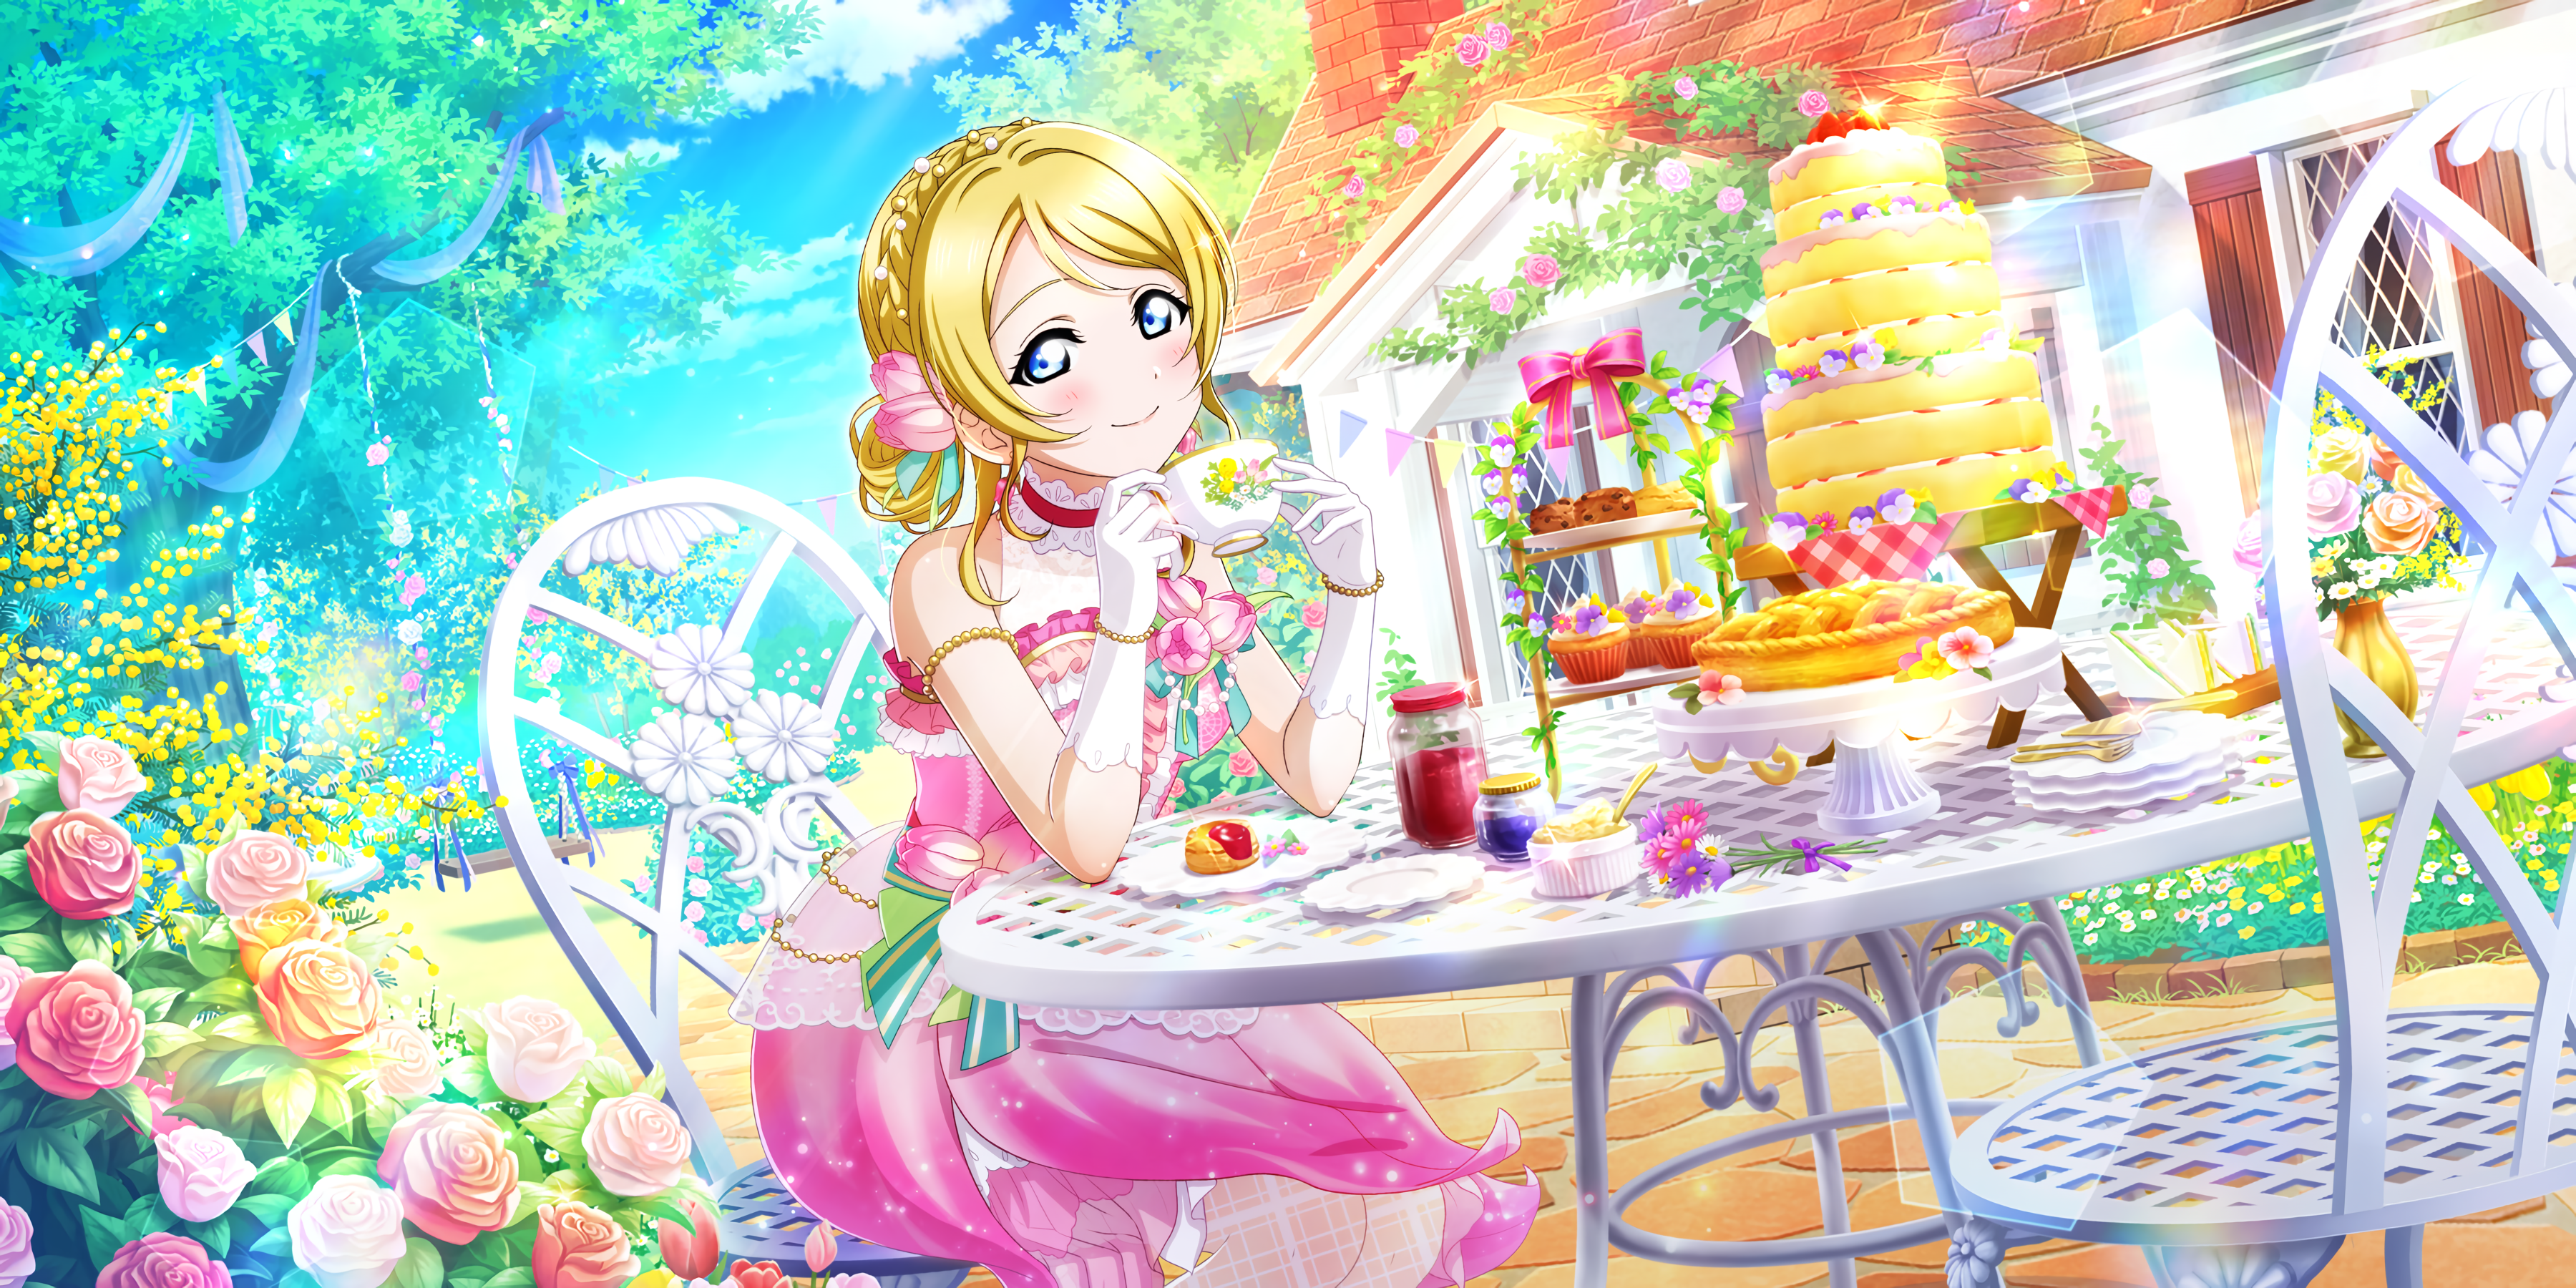 Ayase Eli Love Live Anime Anime Girls Smiling Blushing Gloves Chair Flowers Cup Sweets Cupcakes Tea  3600x1800